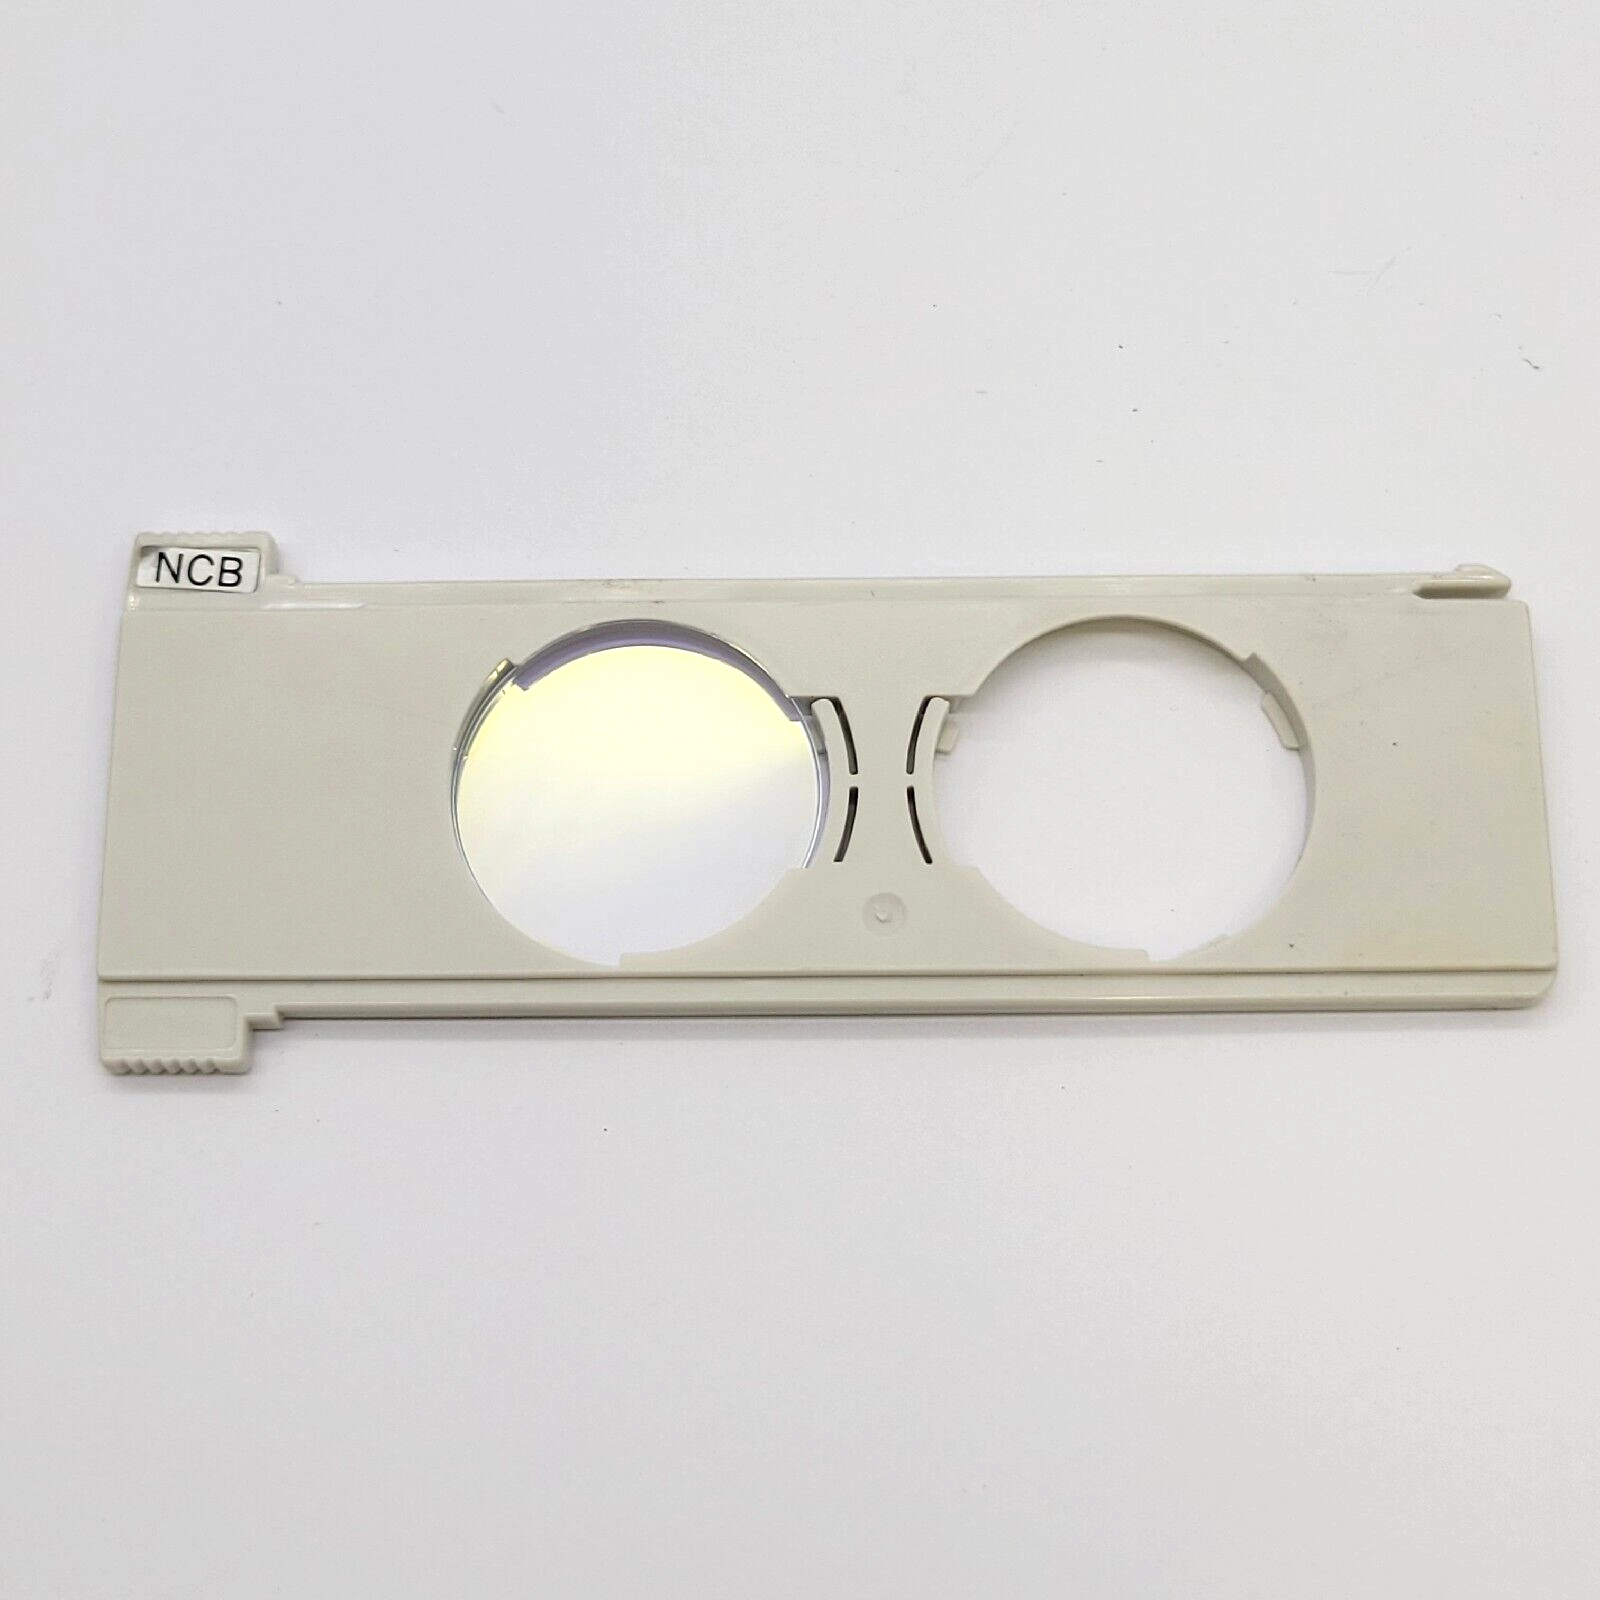 Nikon Microscope NCB Daylight Blue Filter Slider for Inverted Eclipse TE200 TE300